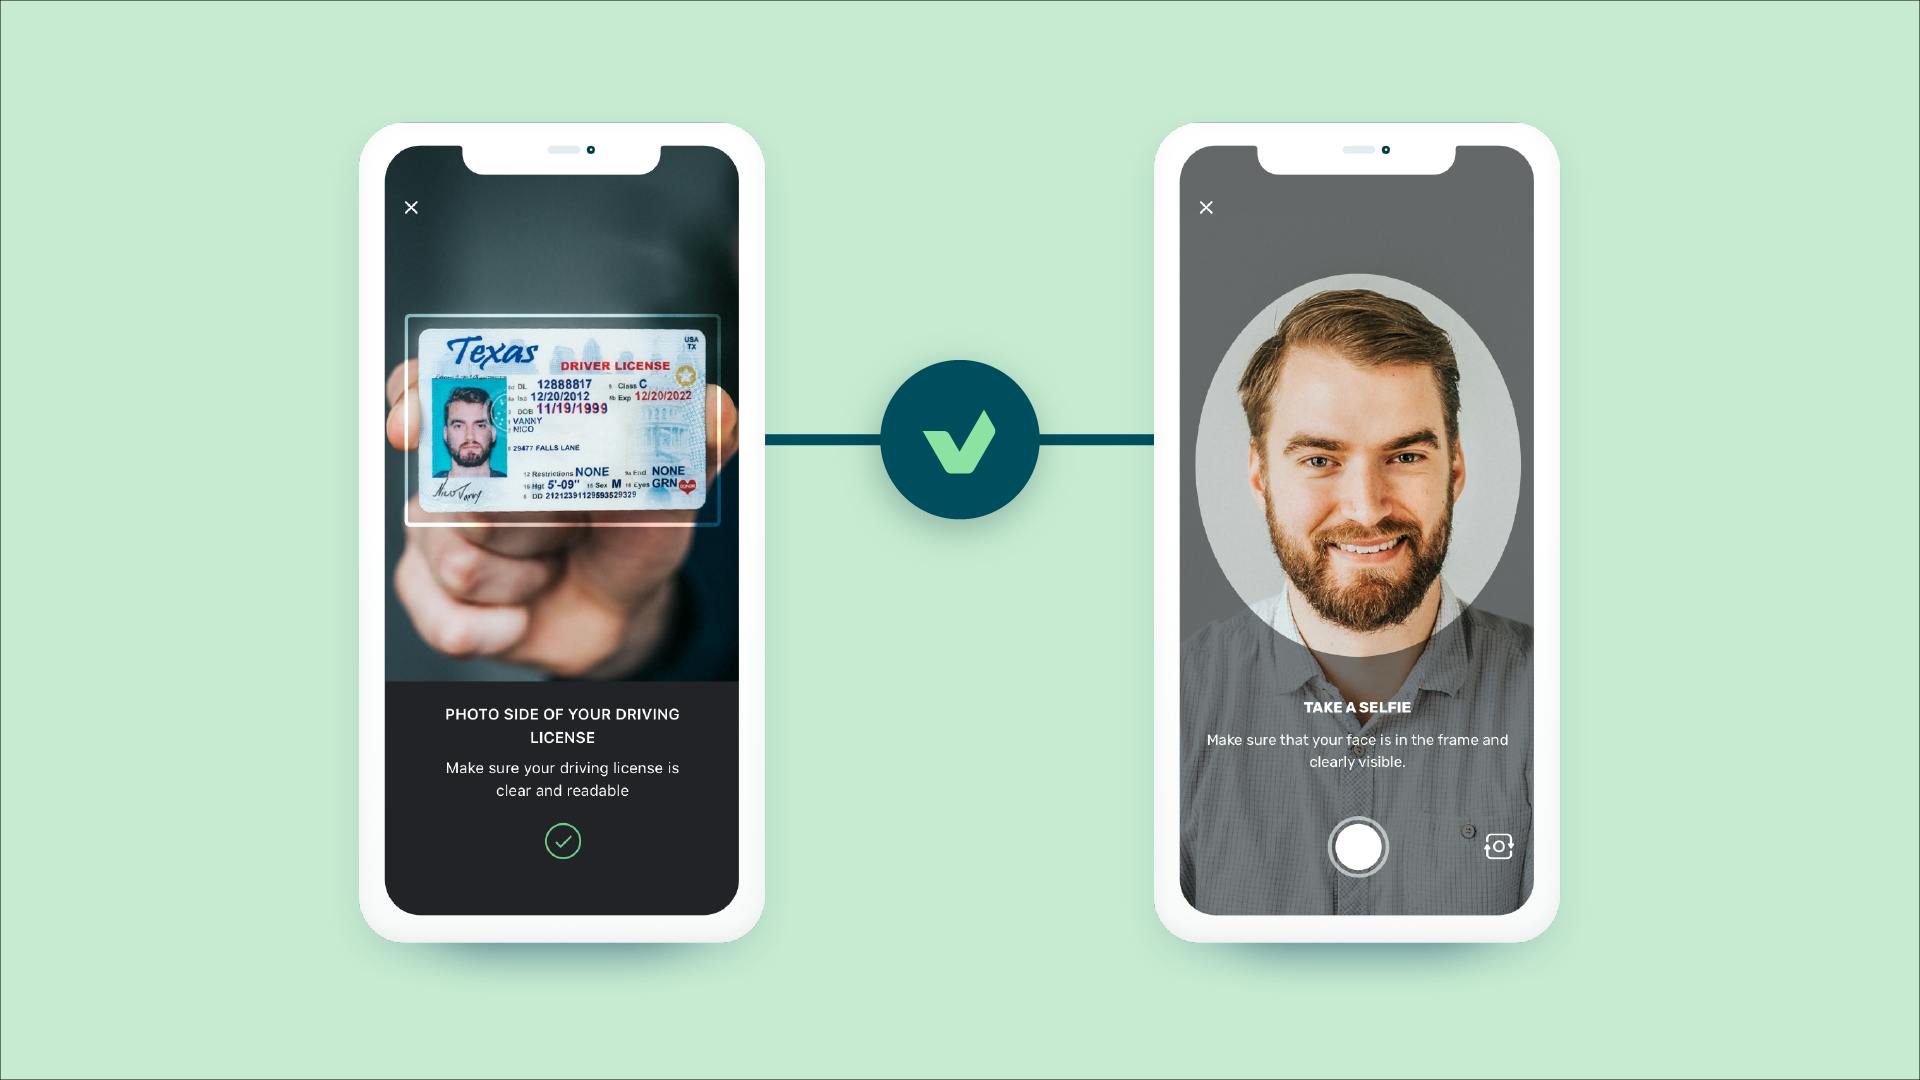 How Veriff uses selfies to verify ID